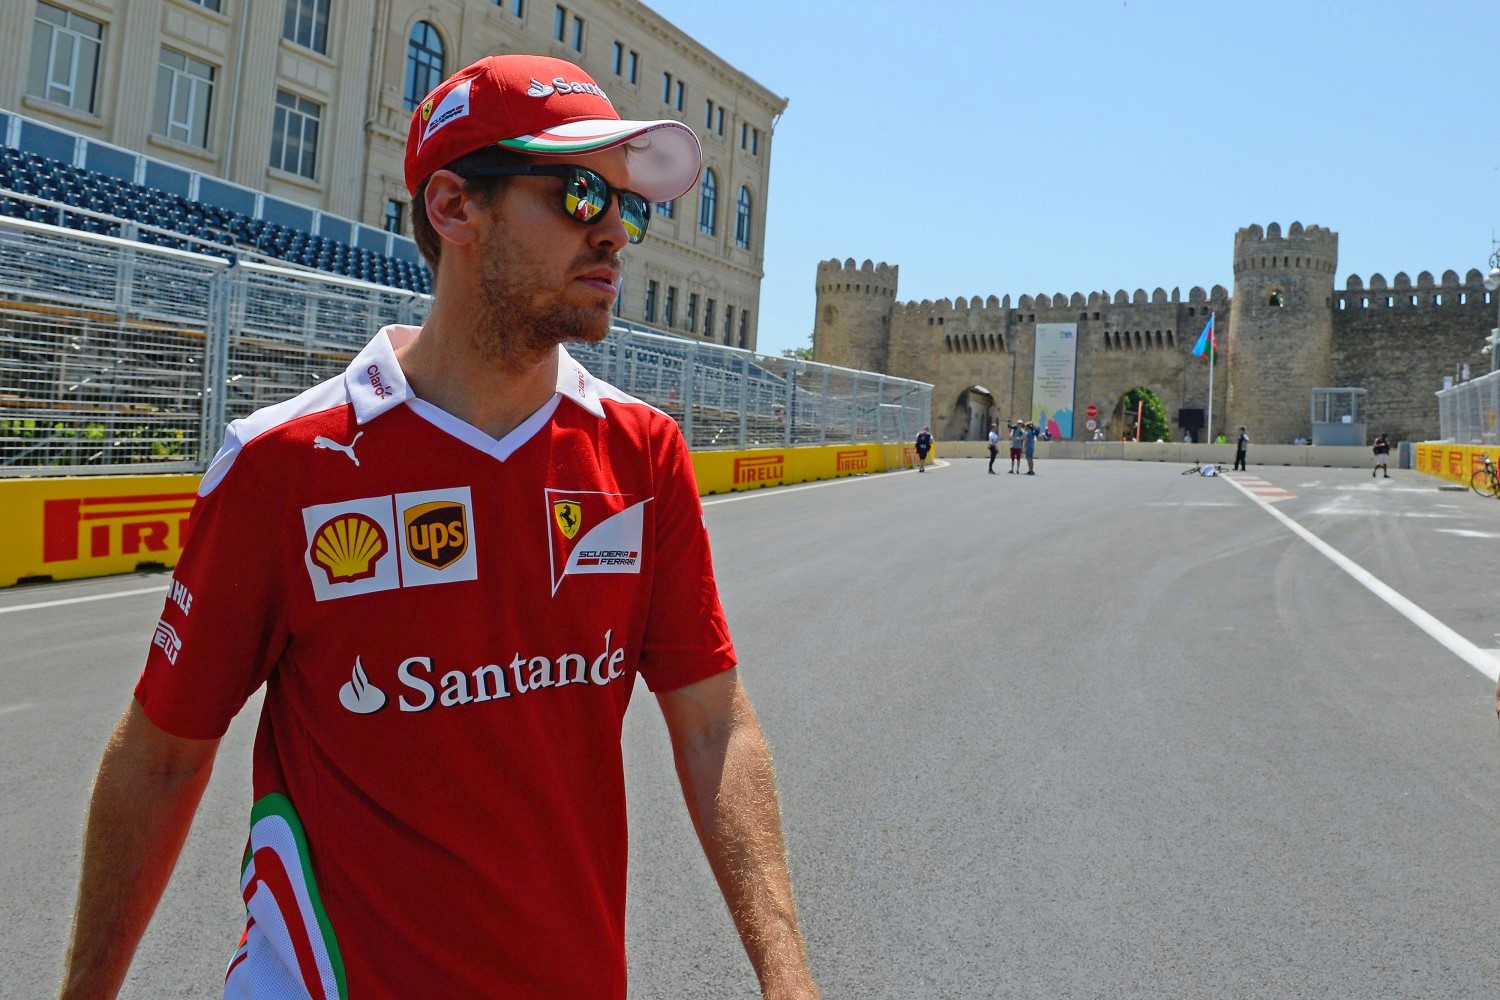 Vettel overrules another possible Ferrari strategy mistake